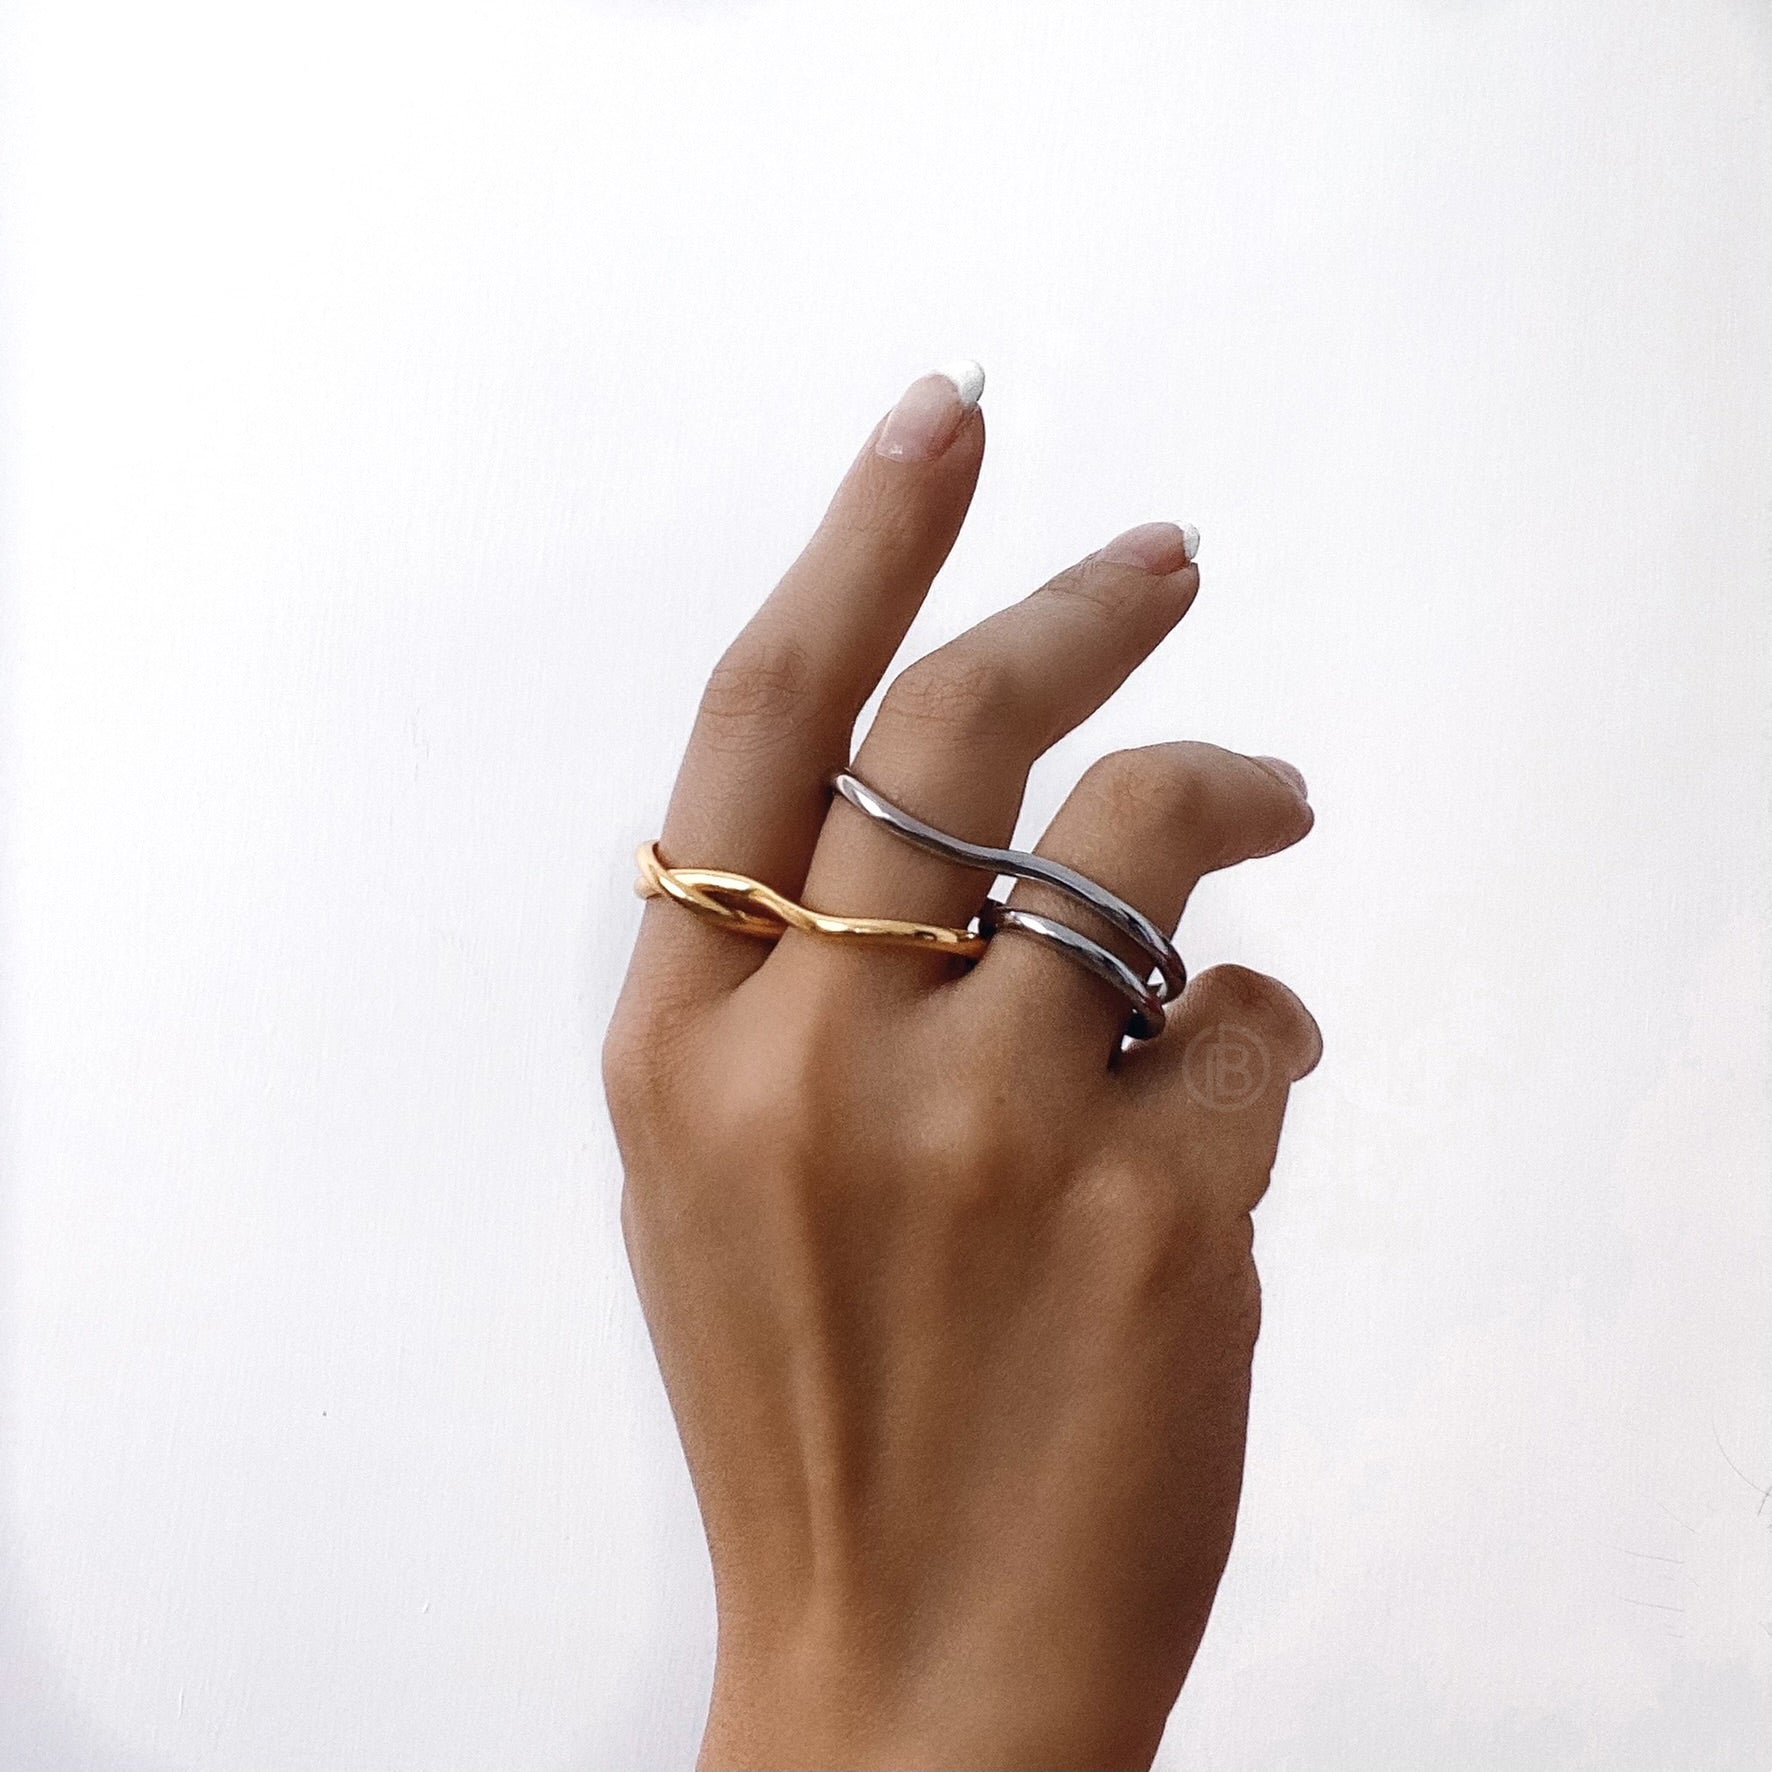 18K Wide Gold Statement Ring, Wide Band Ring, Abstract Geometric Ring, Silver Knuckle Ring